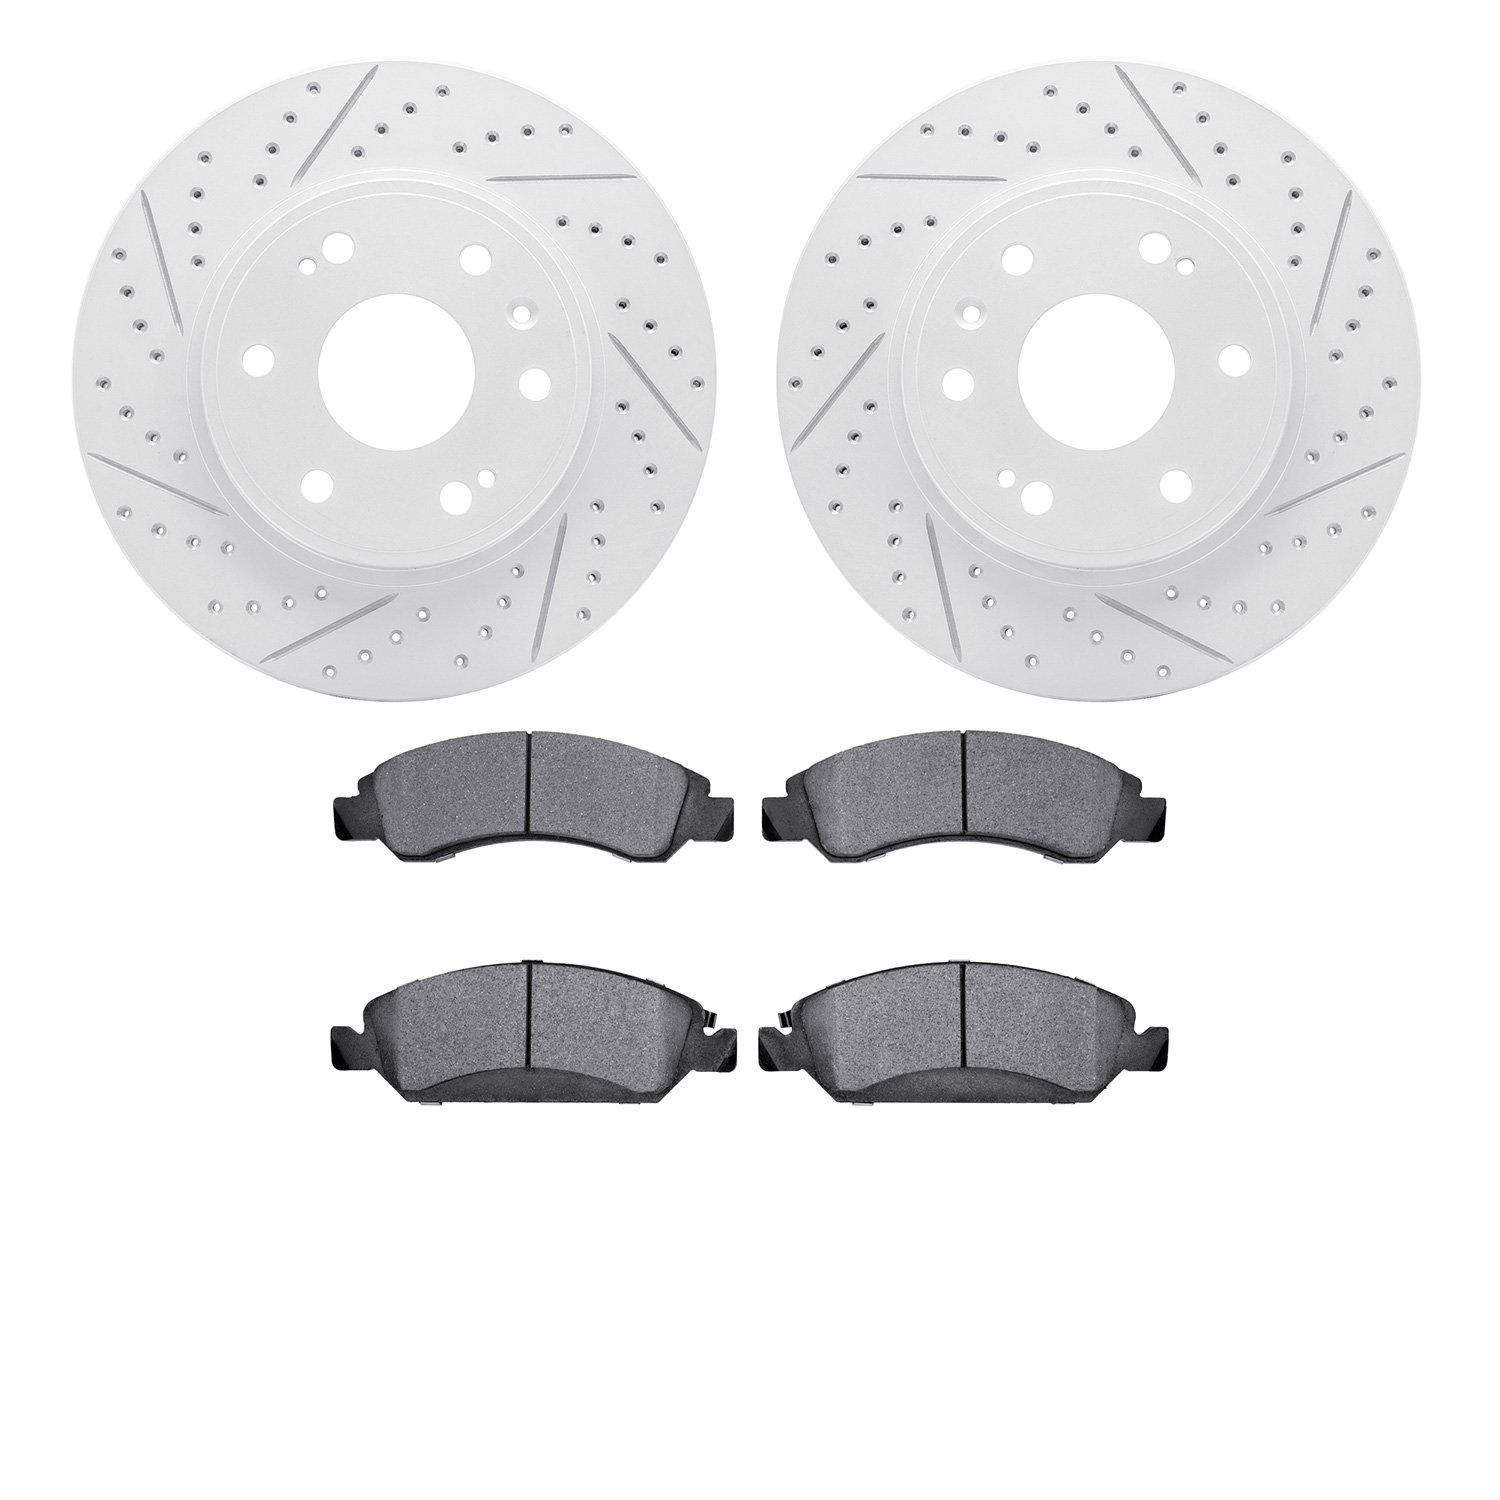 2502-48080 Geoperformance Drilled/Slotted Rotors w/5000 Advanced Brake Pads Kit, 2009-2020 GM, Position: Front